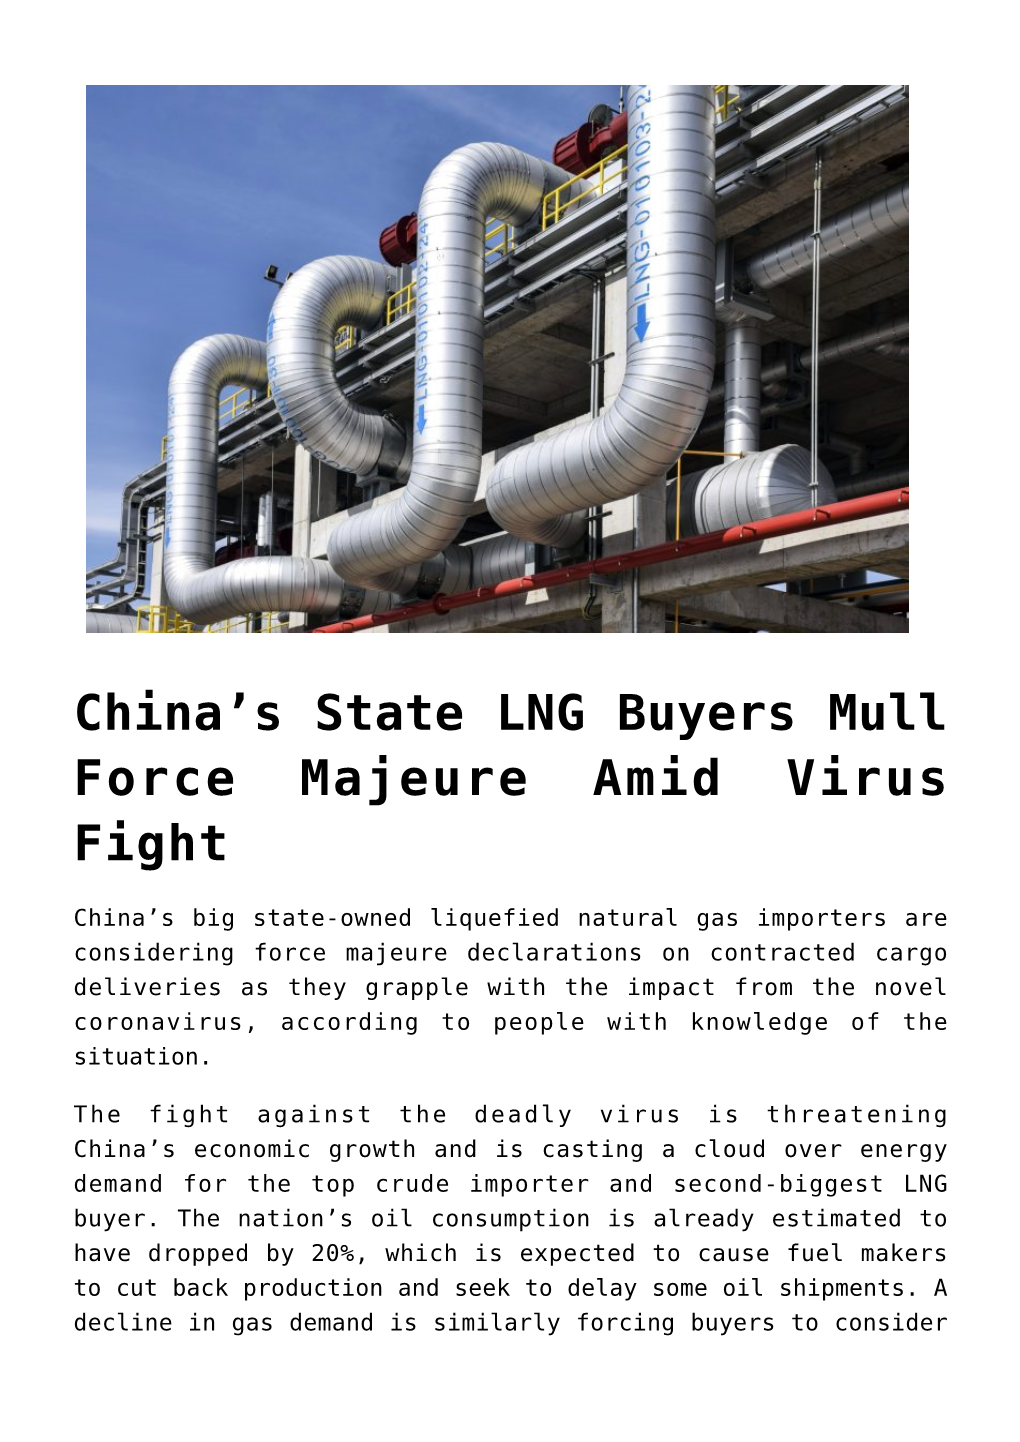 China's State LNG Buyers Mull Force Majeure